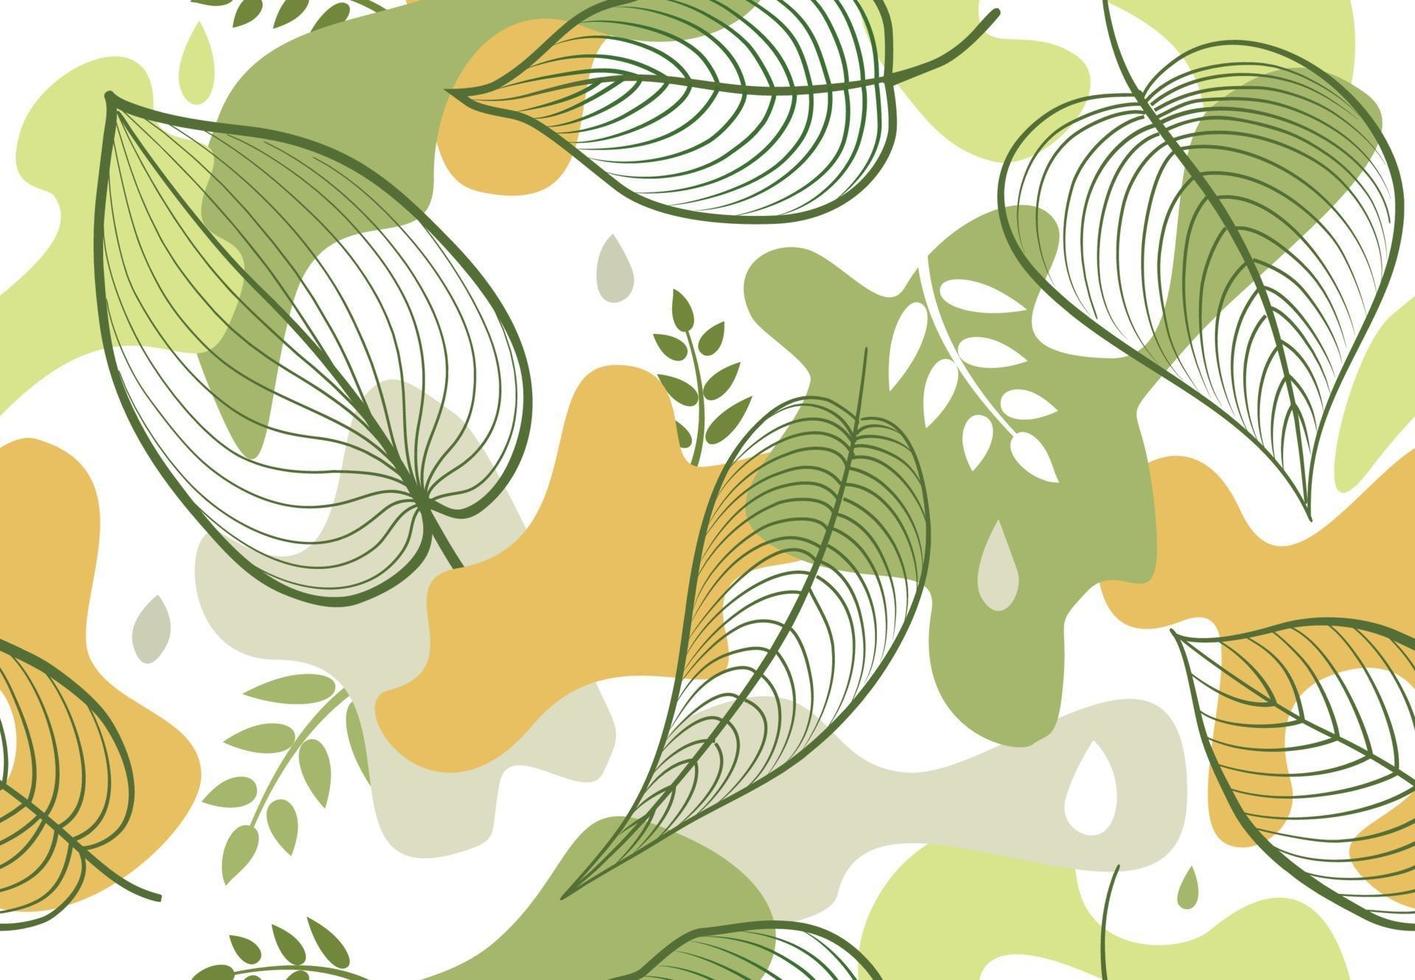 Seamless pattern with organic shape blots in memphis style. Stylish floral painted wallpaper with leaves. Summer nature tile background vector